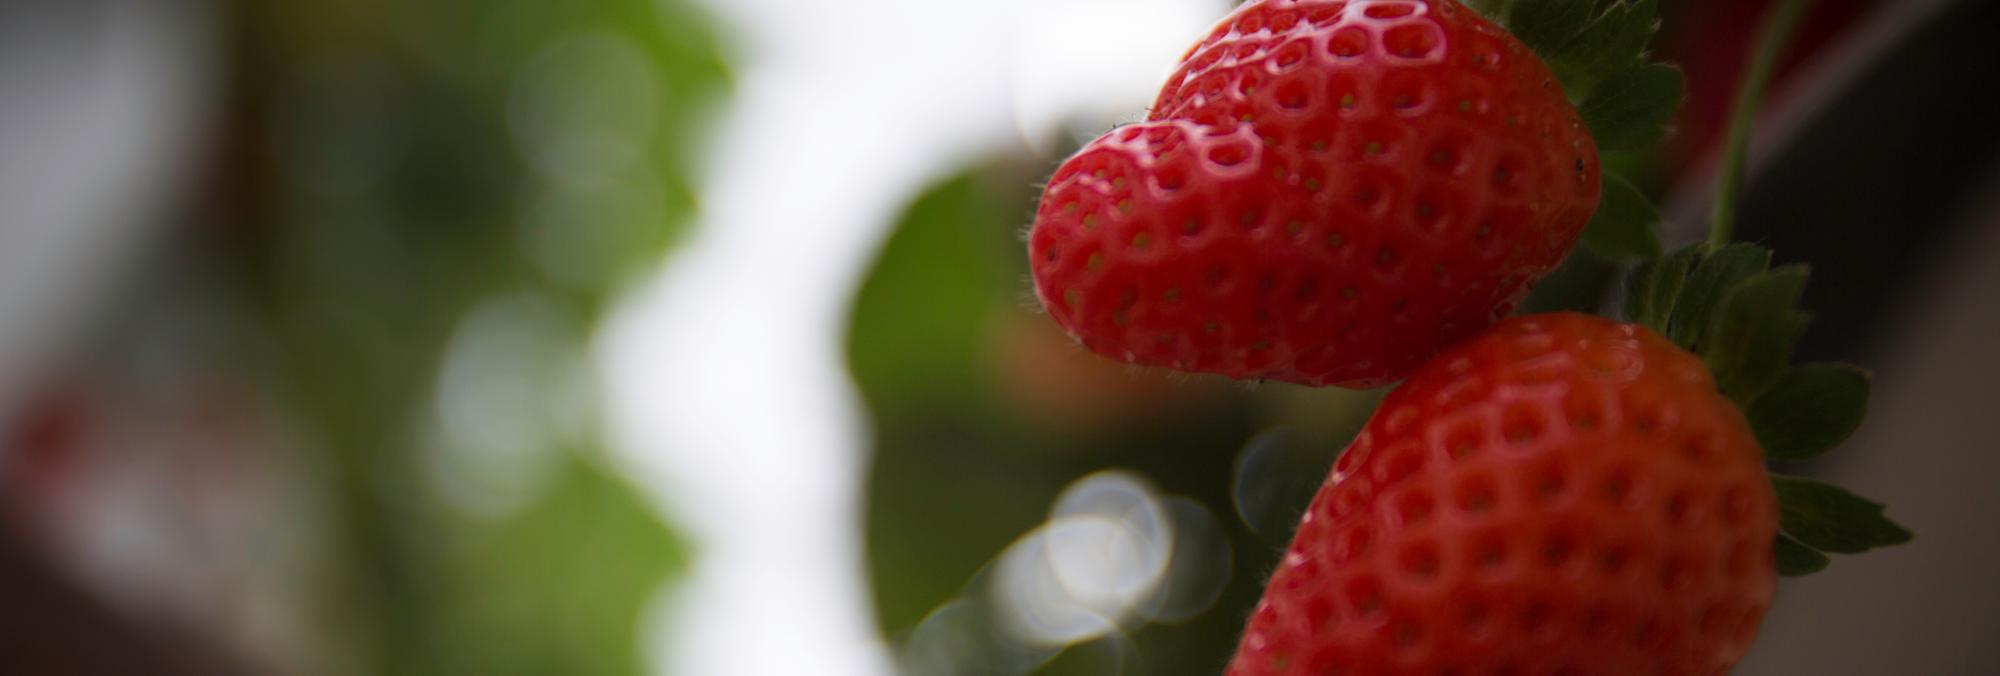 In the foreground, two small red strawberries grow on a bush, while the background suggests a greenhouse.